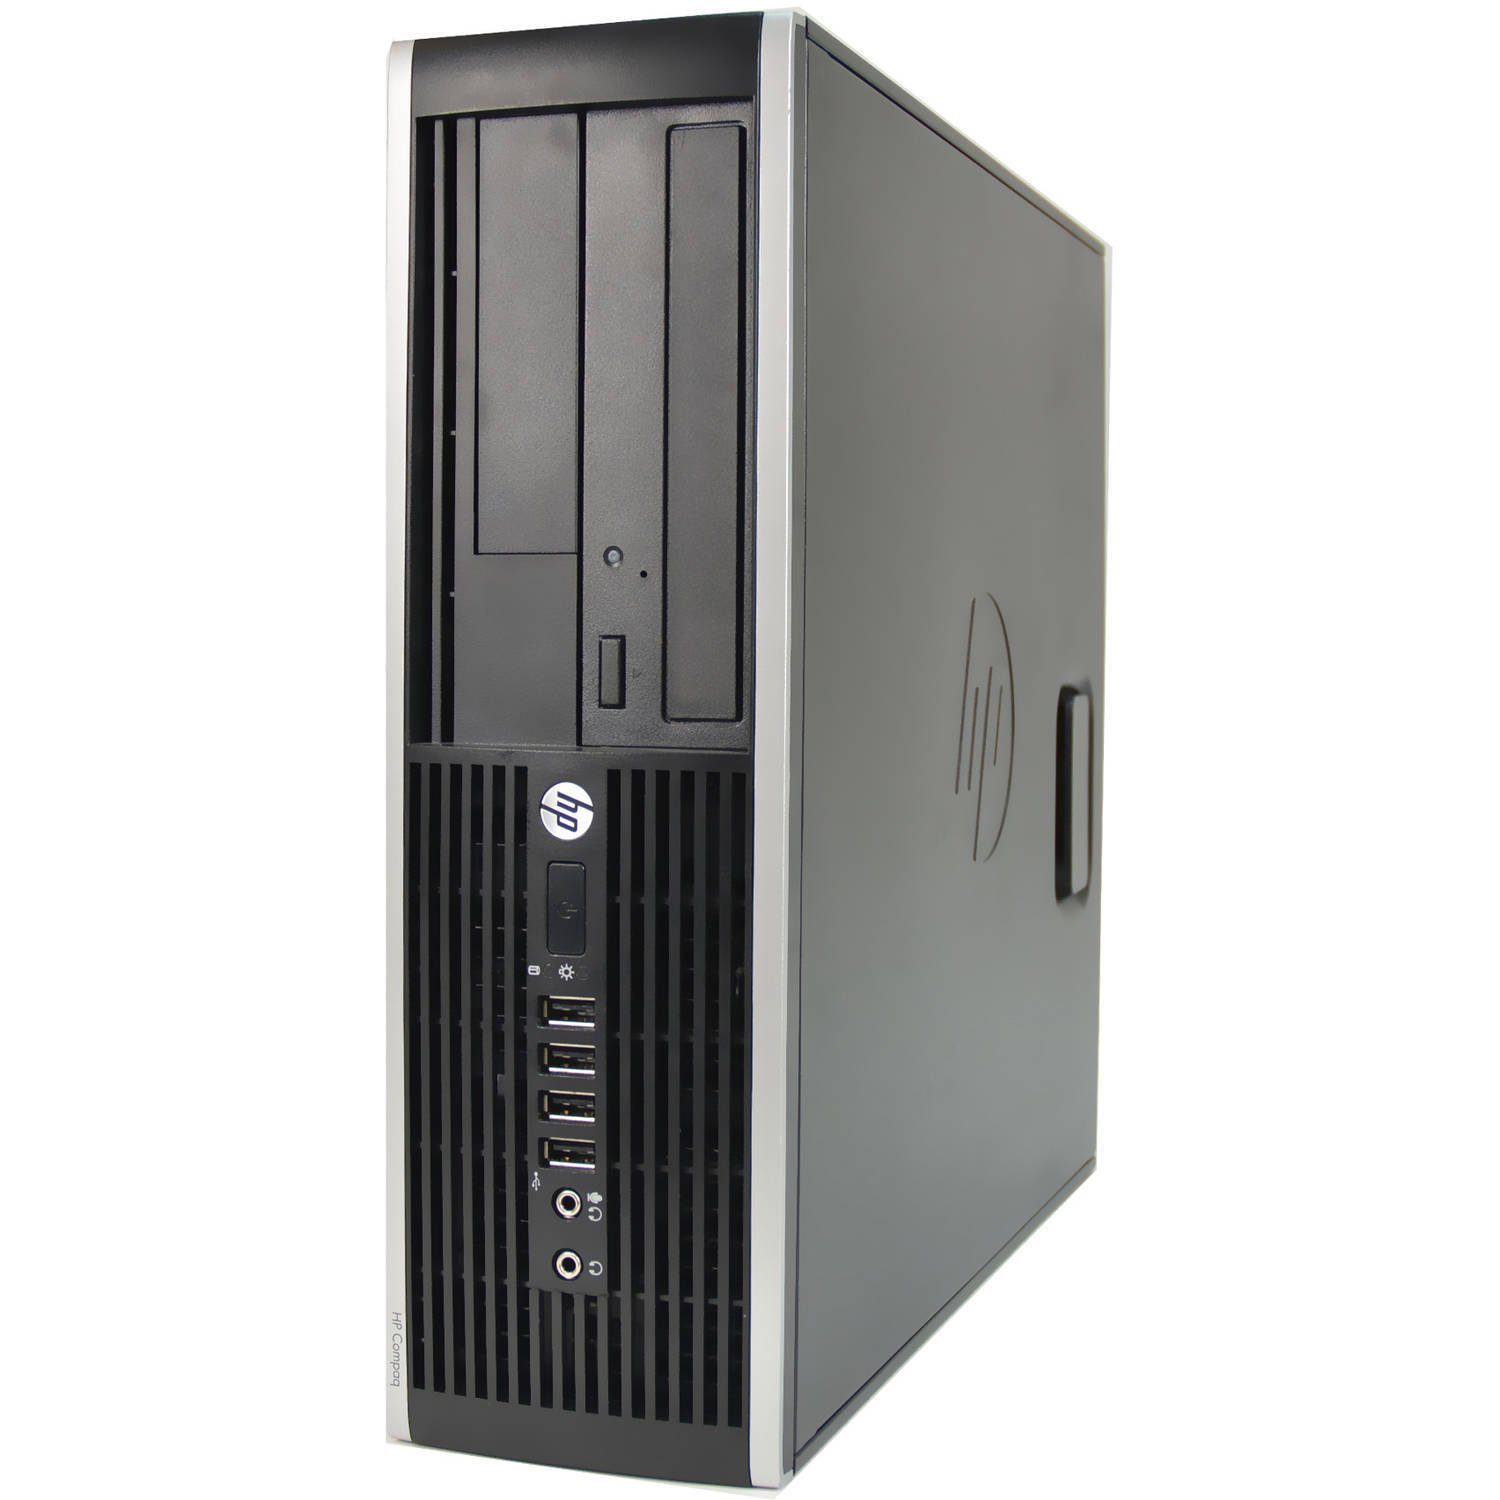 HP ELITE 8300 SFF | INTEL CORE i3-2120 3.3GHZ | Ram 8Gb | SSD 256Gb | Windows 10 Pro DVD+RW The compact and functional work PC